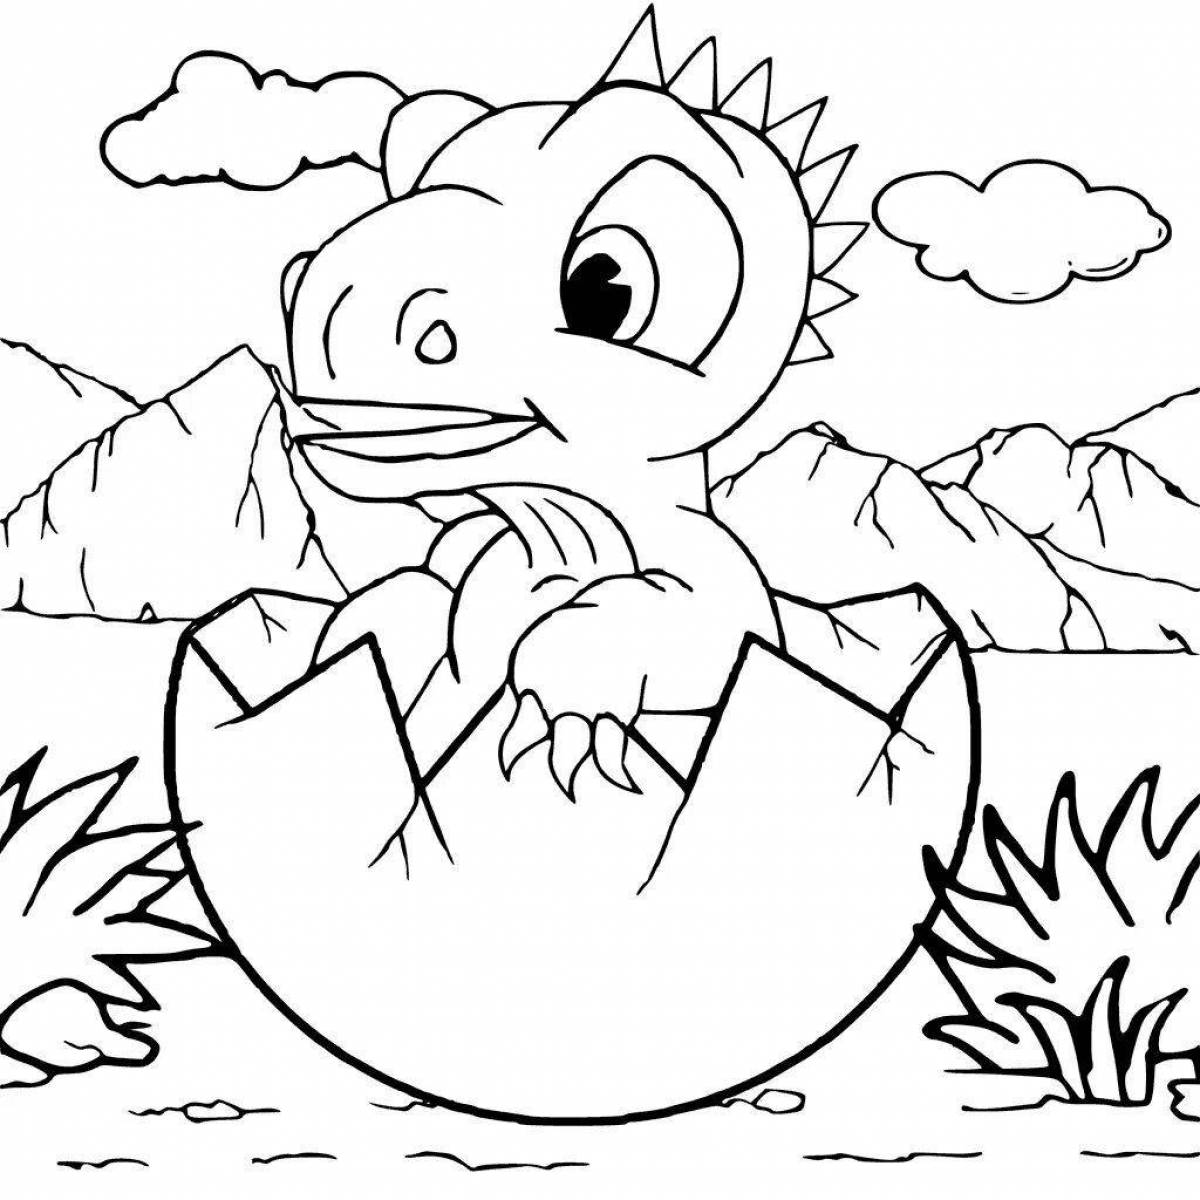 Wonderful dino arch coloring book